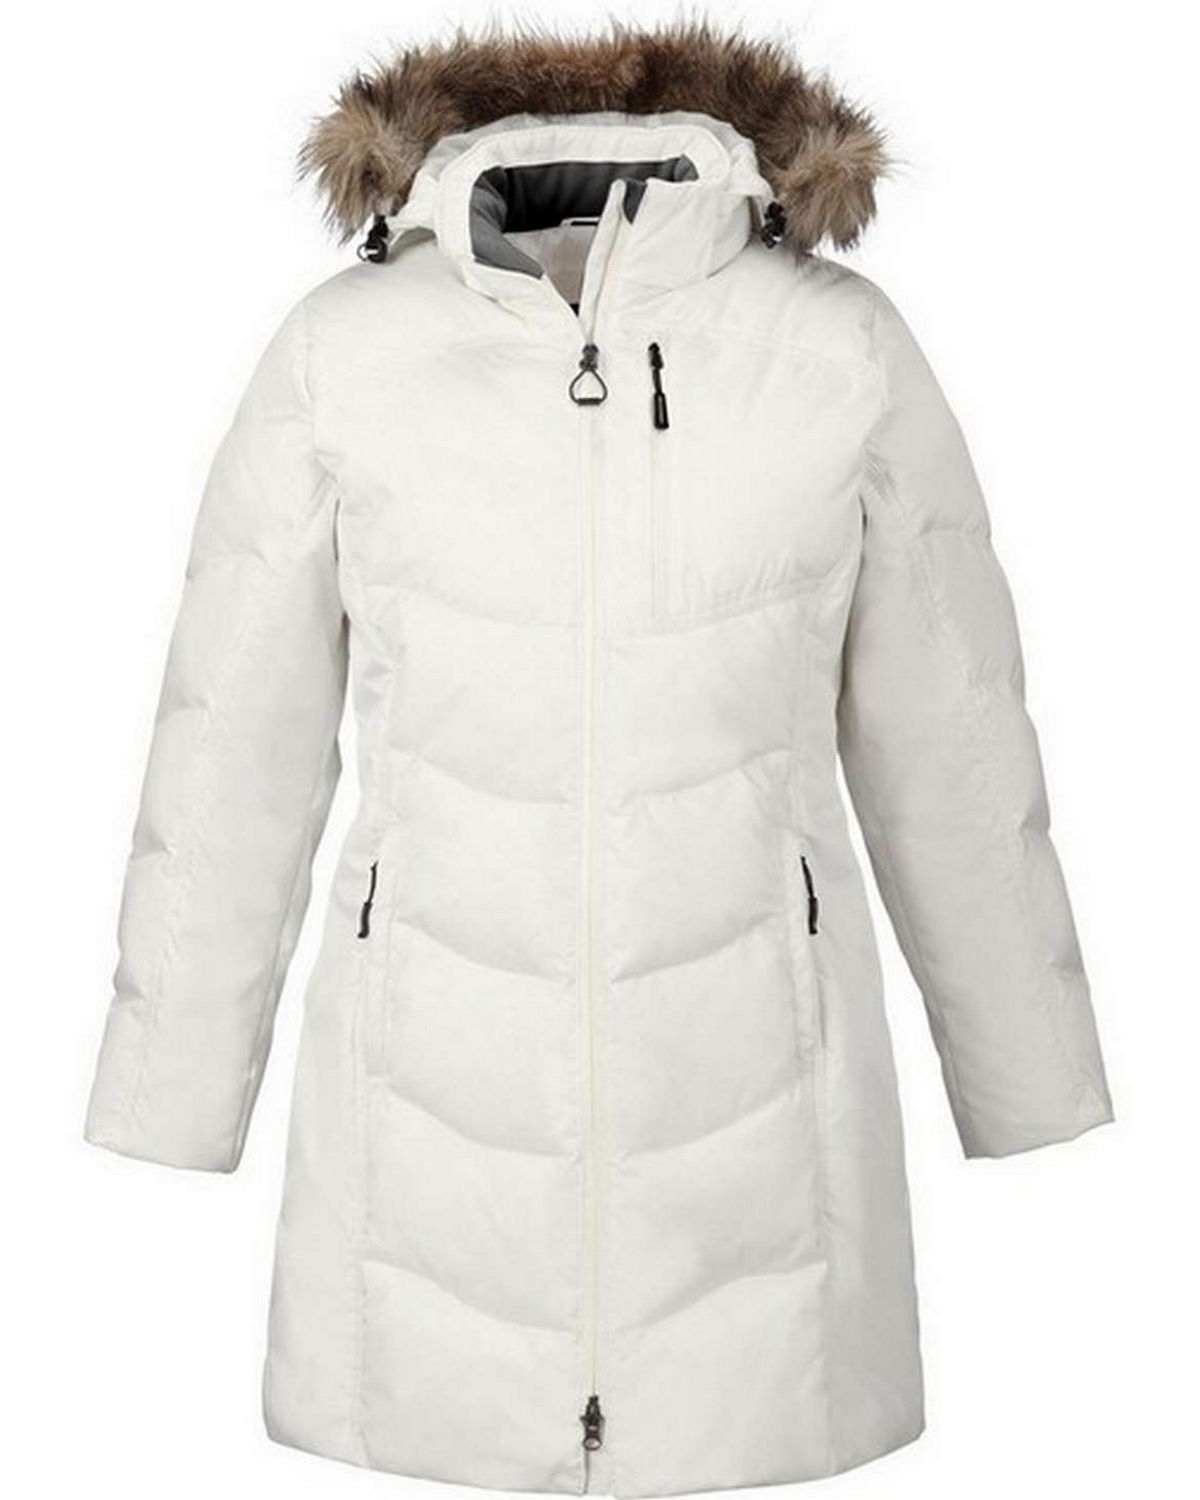 Buy North End 78179 Boreal Ladies Down Jacket With Faux Fur Trim